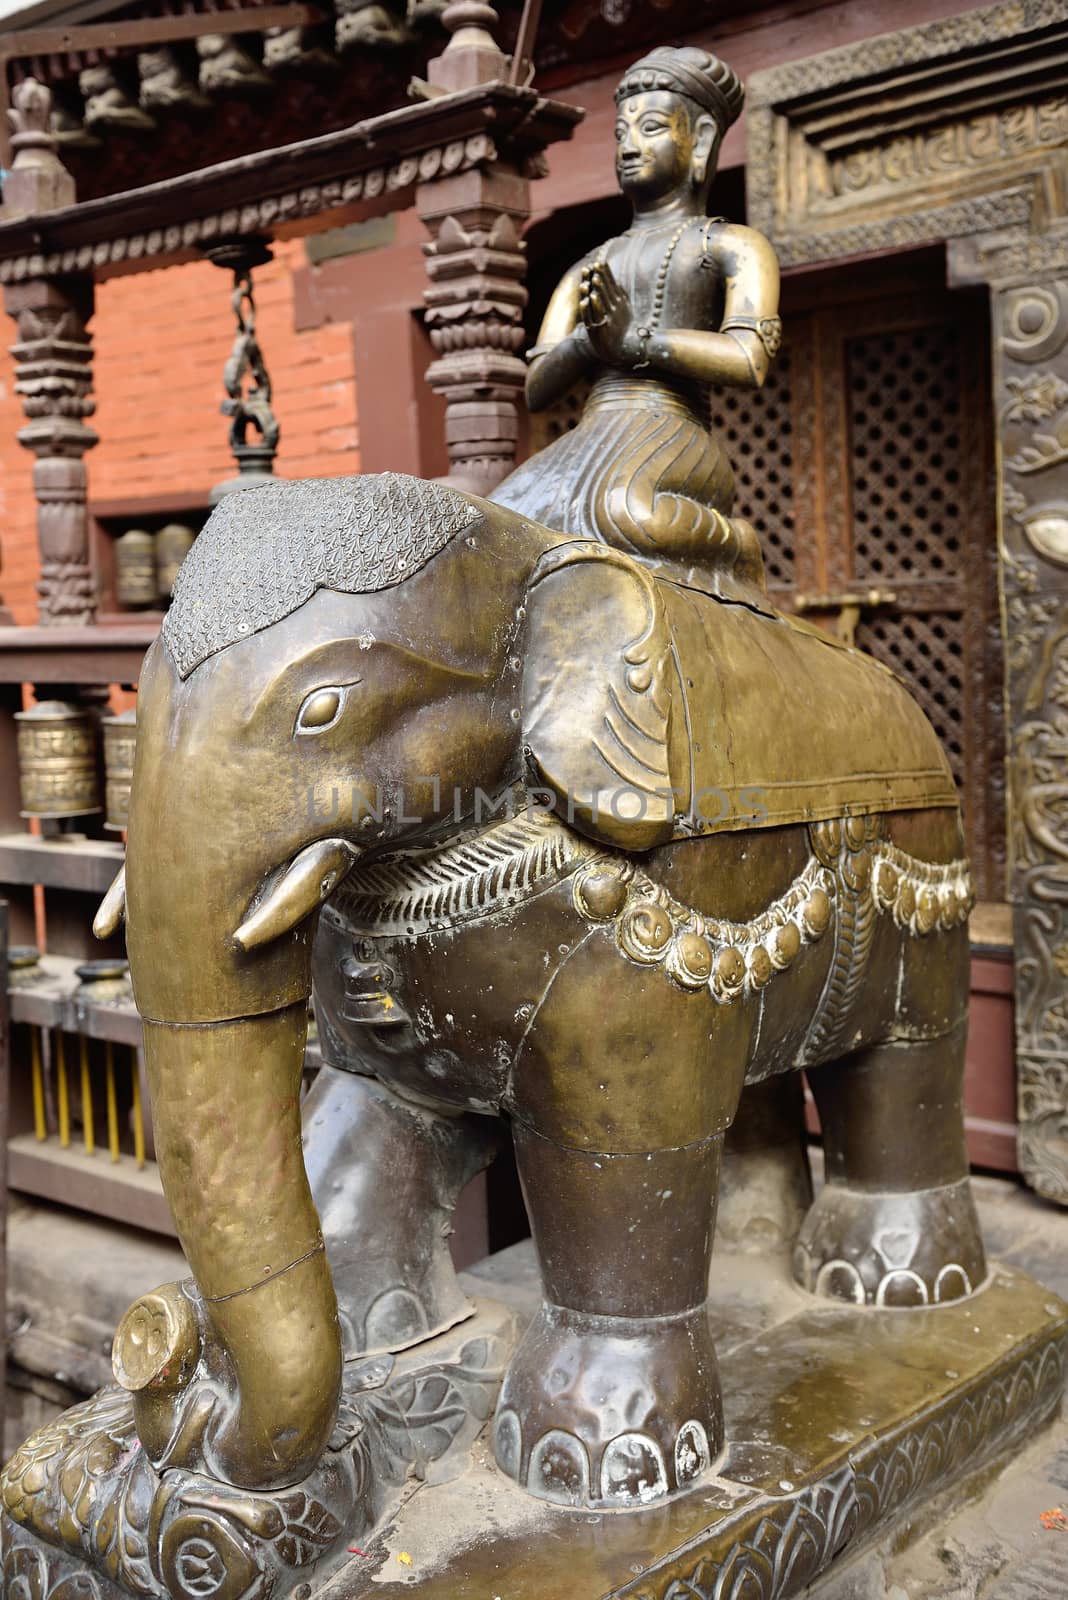 elephant figures in the beautiful golden temple in patan, nepal by think4photop